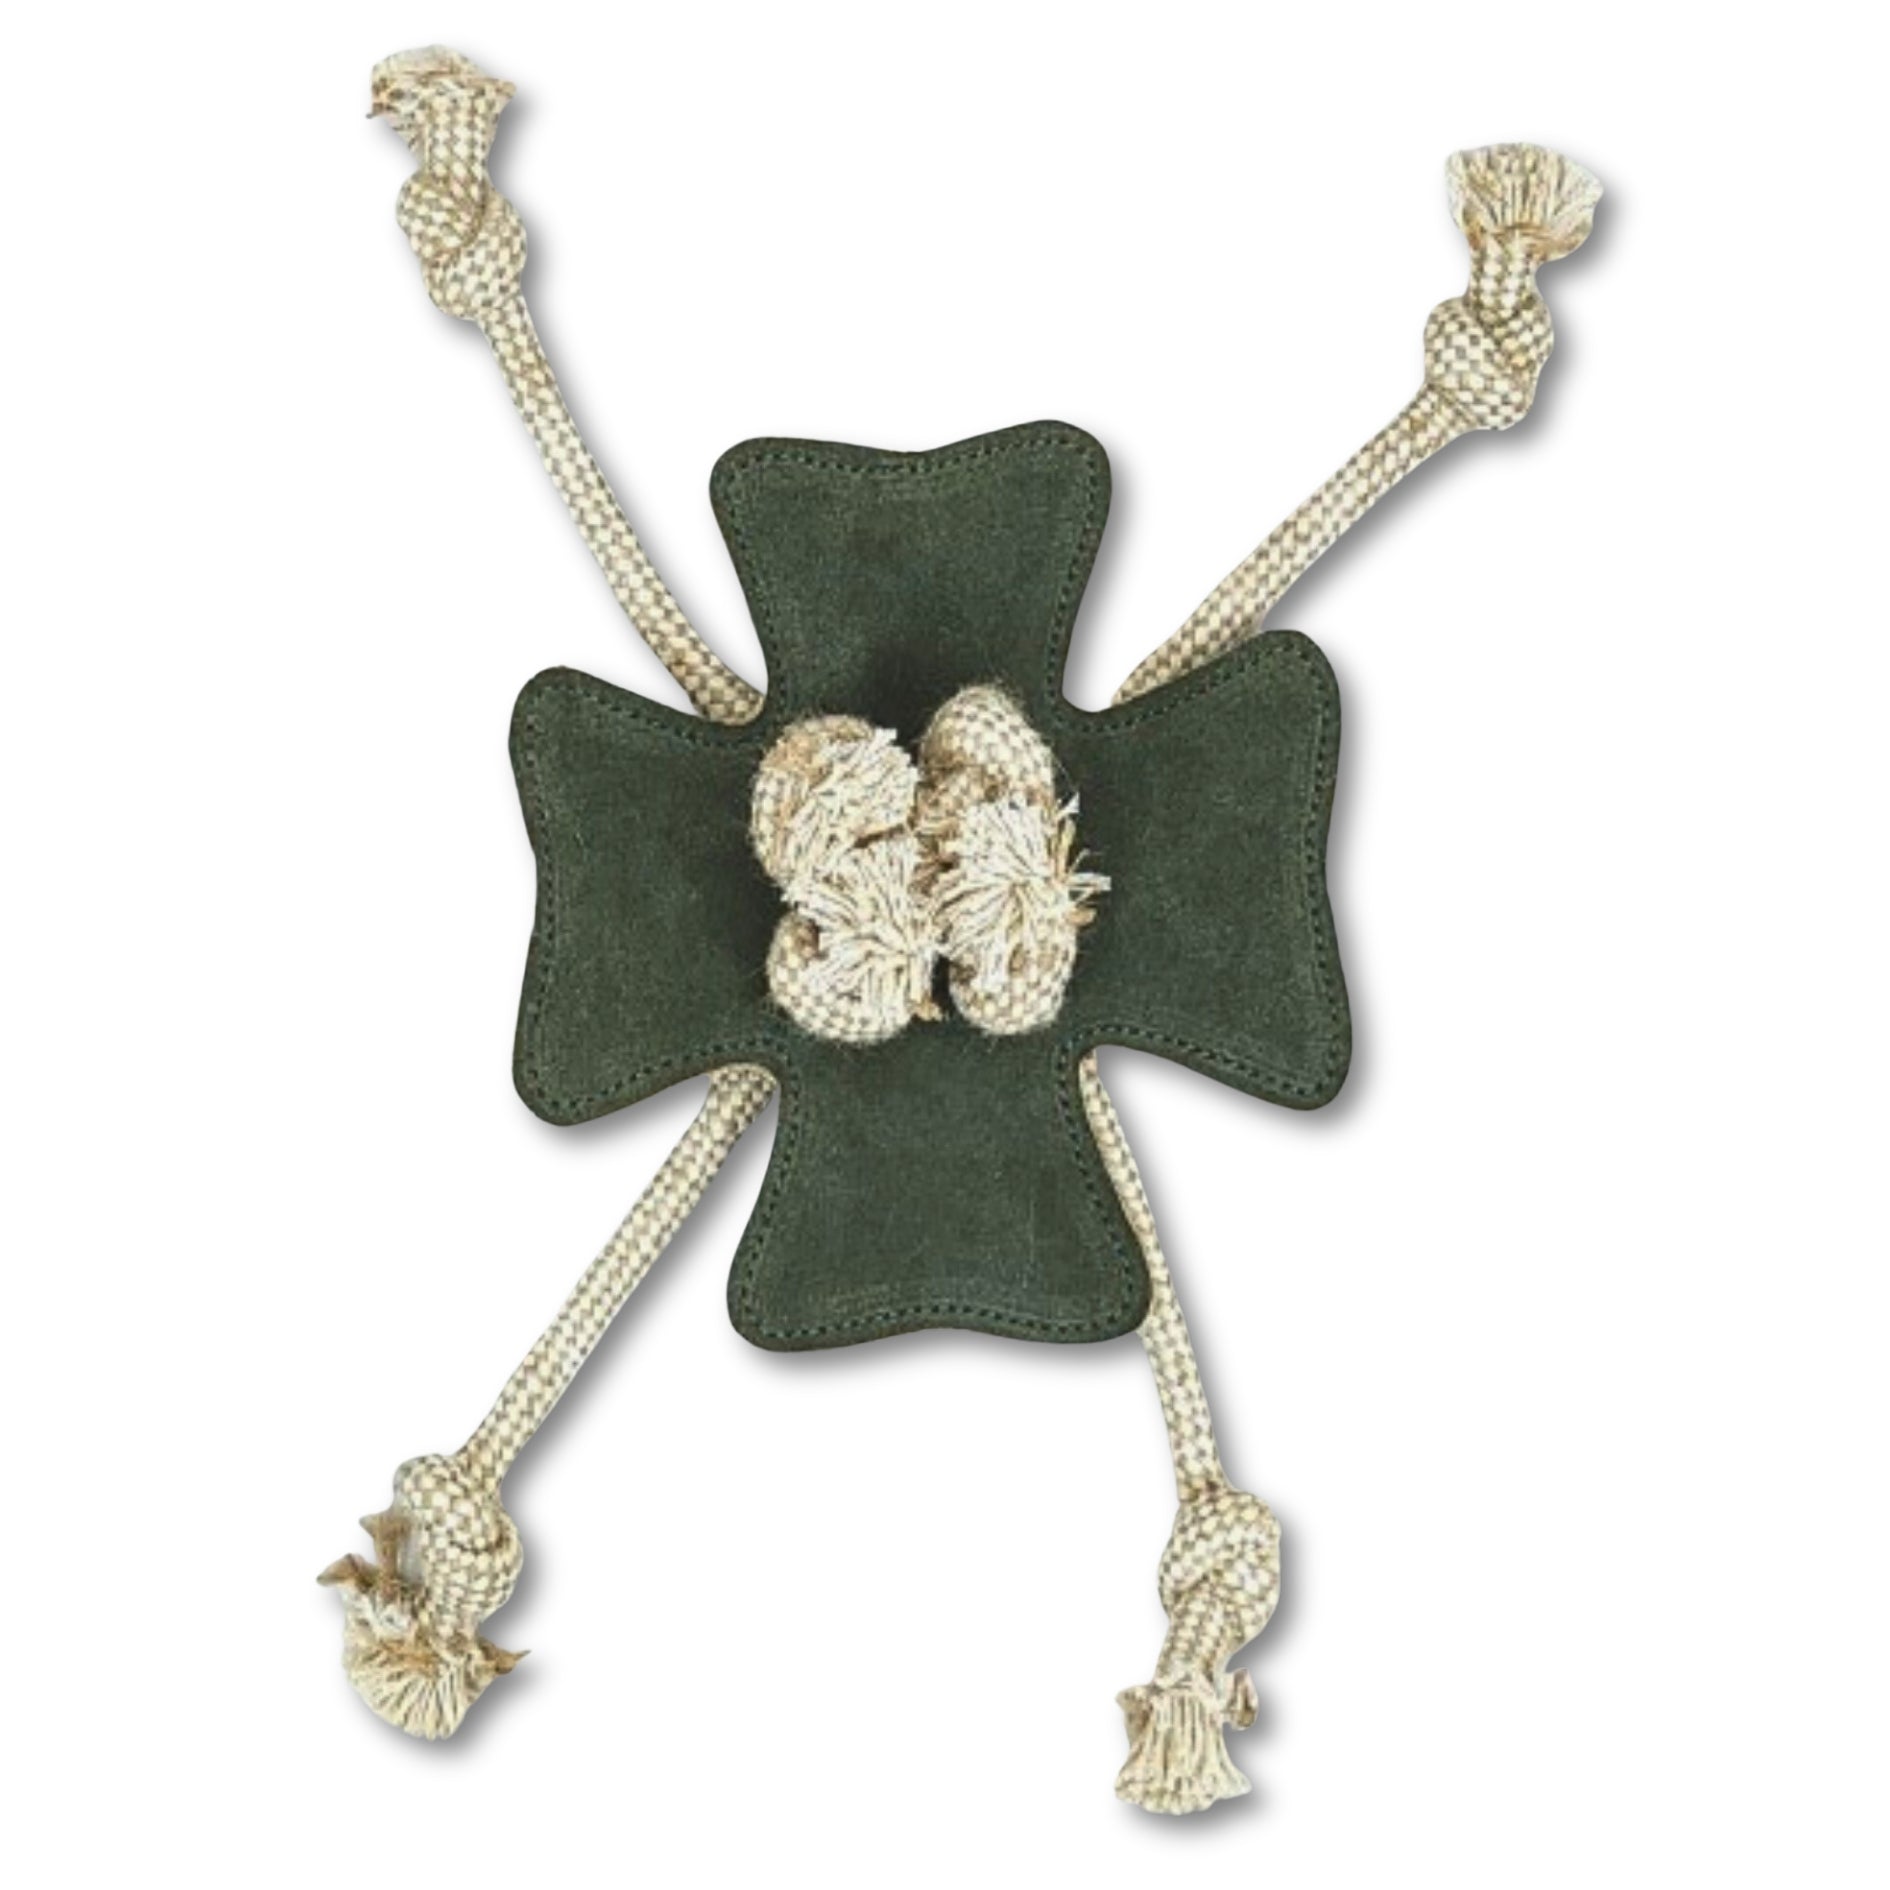 A compostable chew toy shaped like a clover with a rope tied around it.